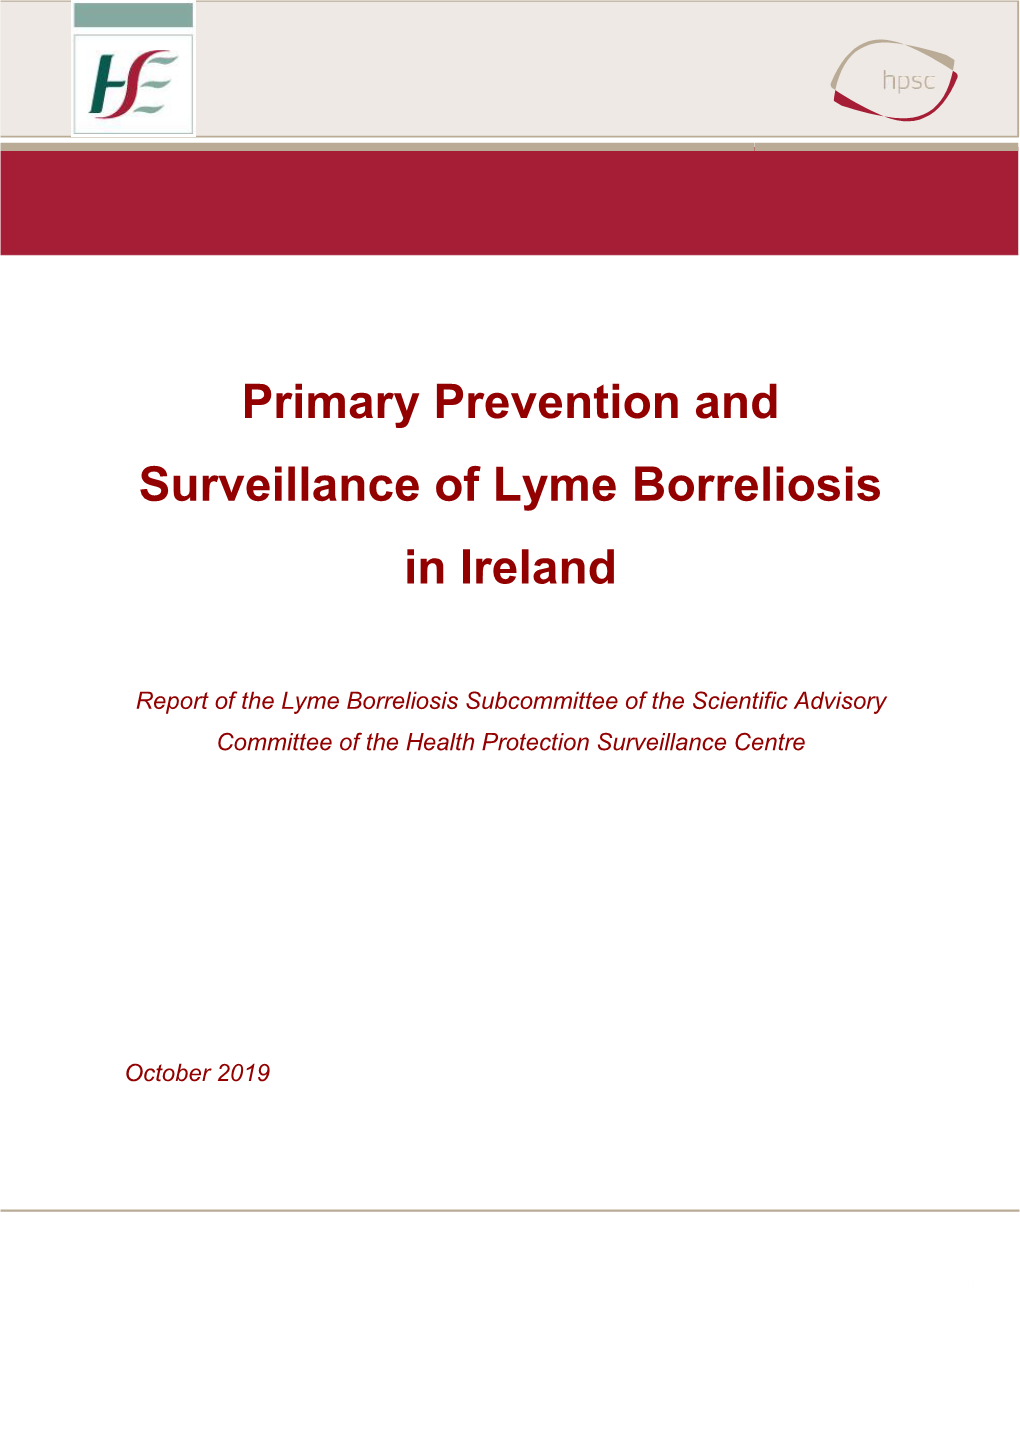 Primary Prevention and Surveillance of Lyme Borreliosis in Ireland